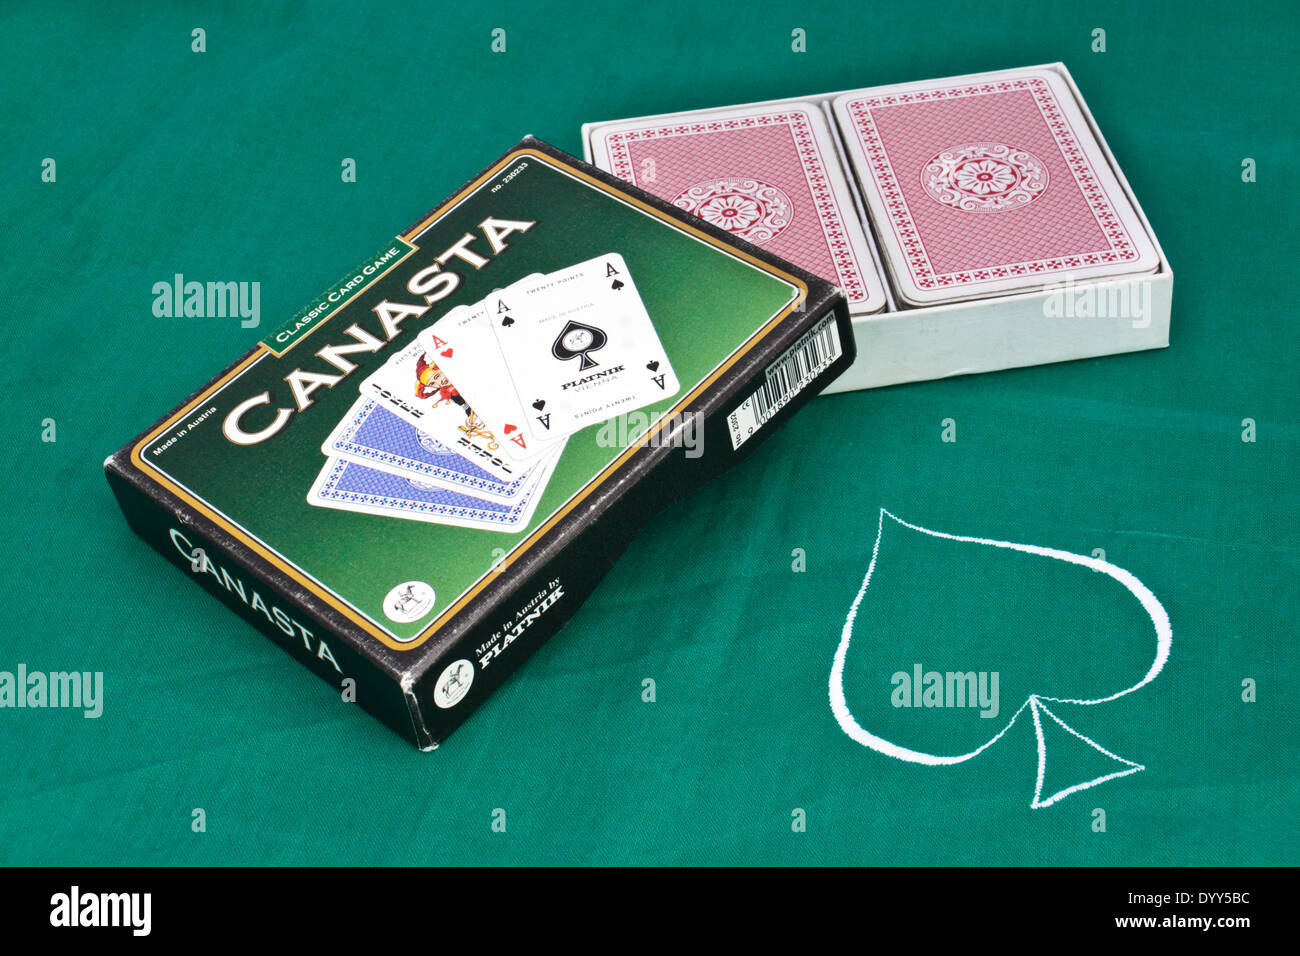 Canasta playing cards, made by Piatnik in Austria Stock Photo